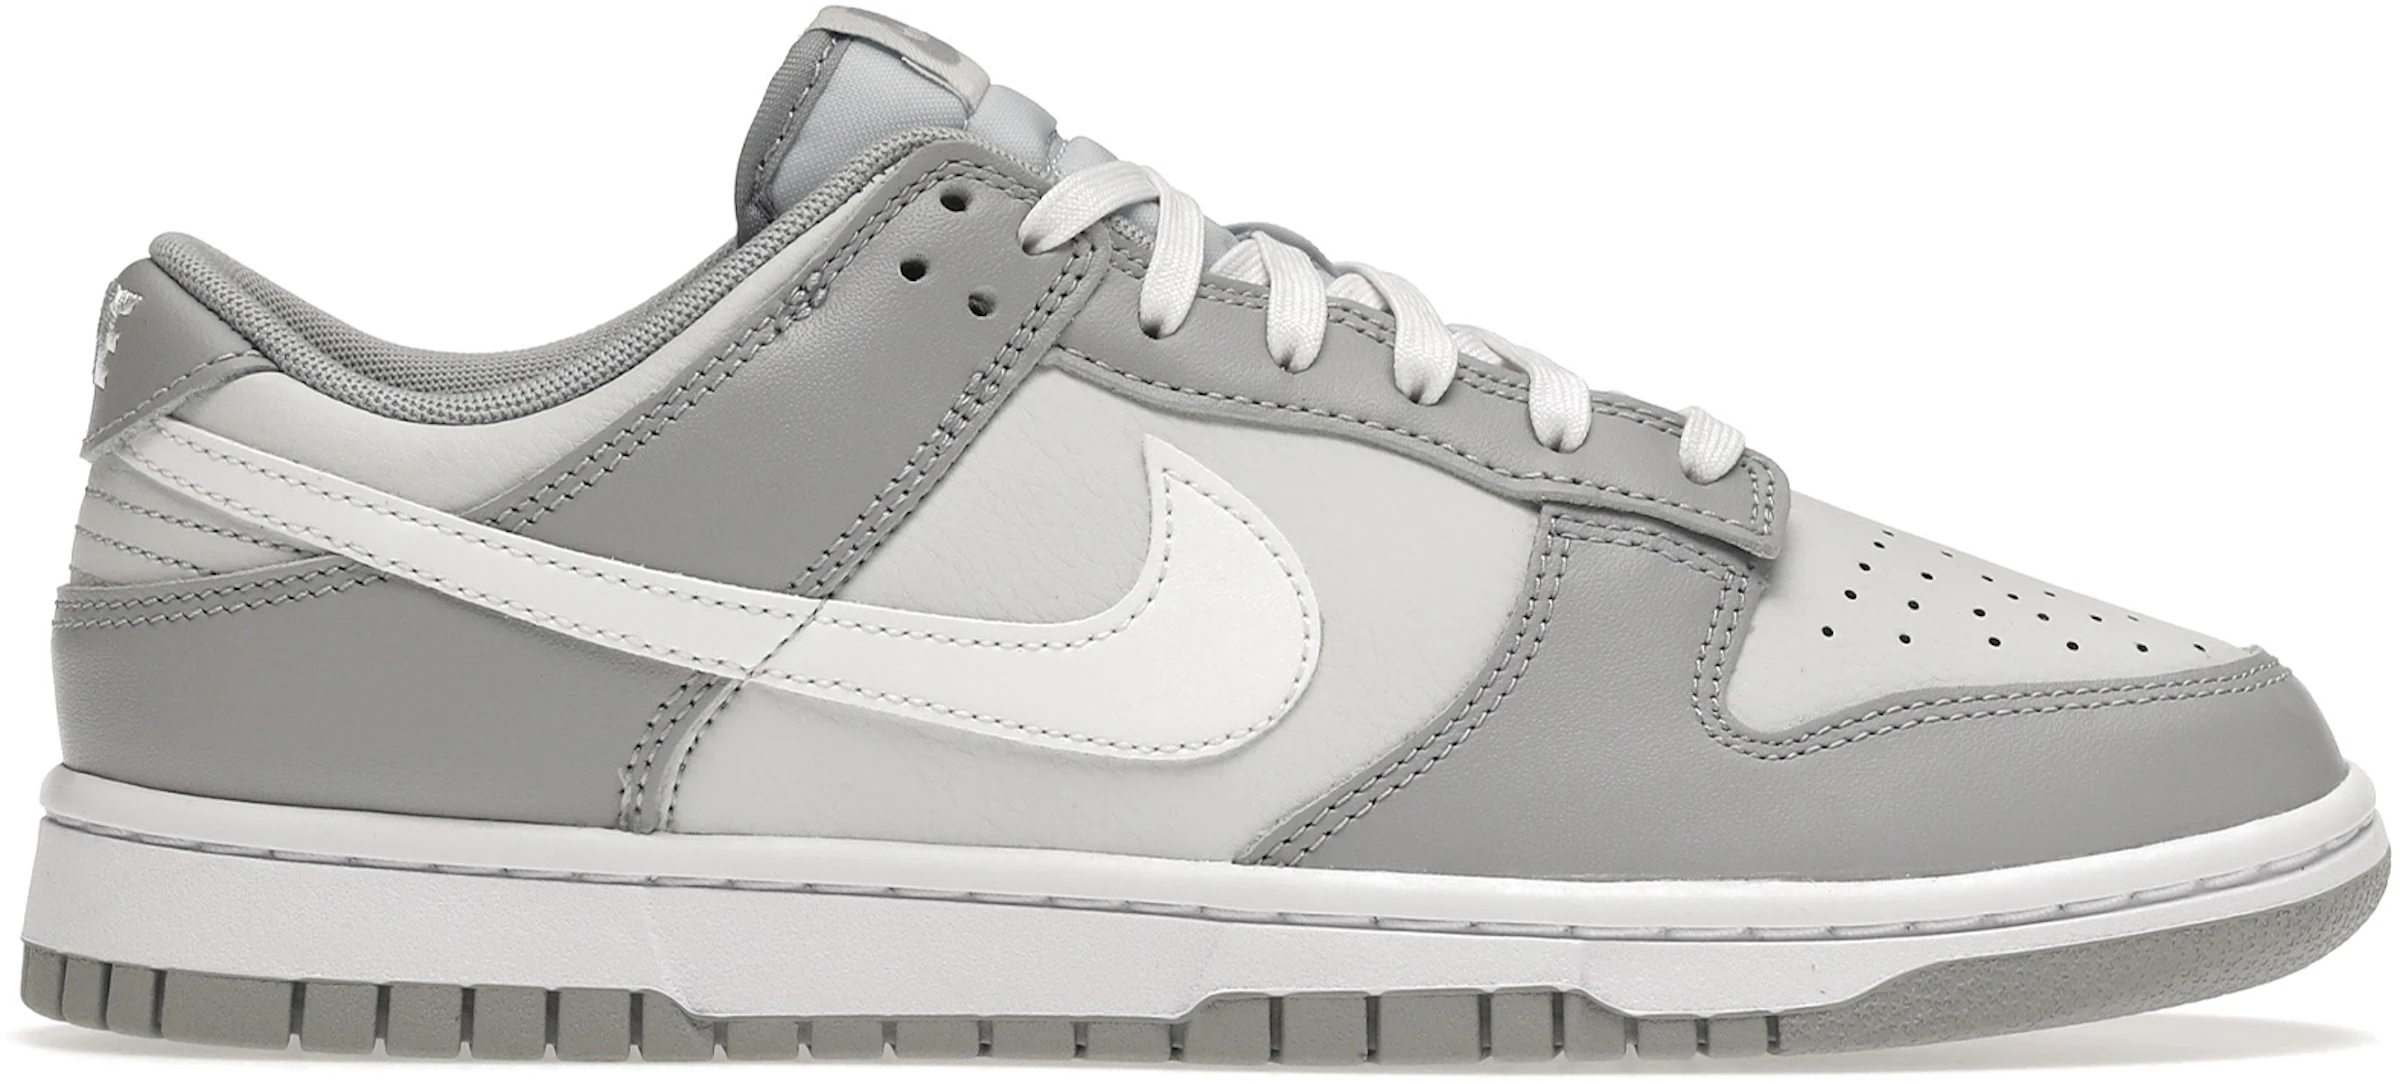 Nike Dunk Low Two Tone Grey: Sleek and Sophisticated Sneakers in Two Tone Grey Colorway